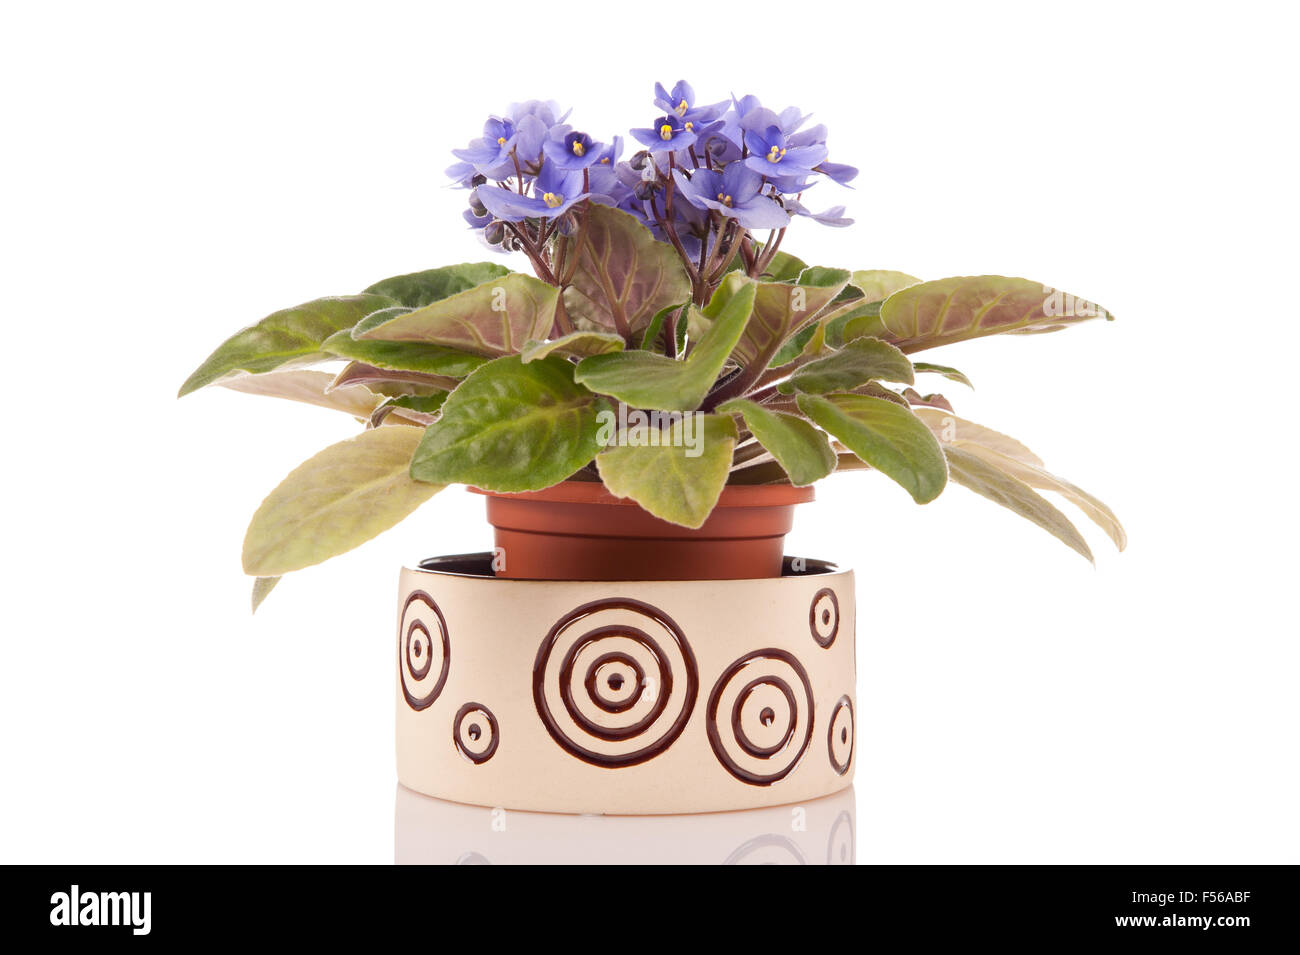 African violet Saintpaulia Ionantha flowering purple, plant in the Gesneriaceae family, african violet household blooming plant Stock Photo